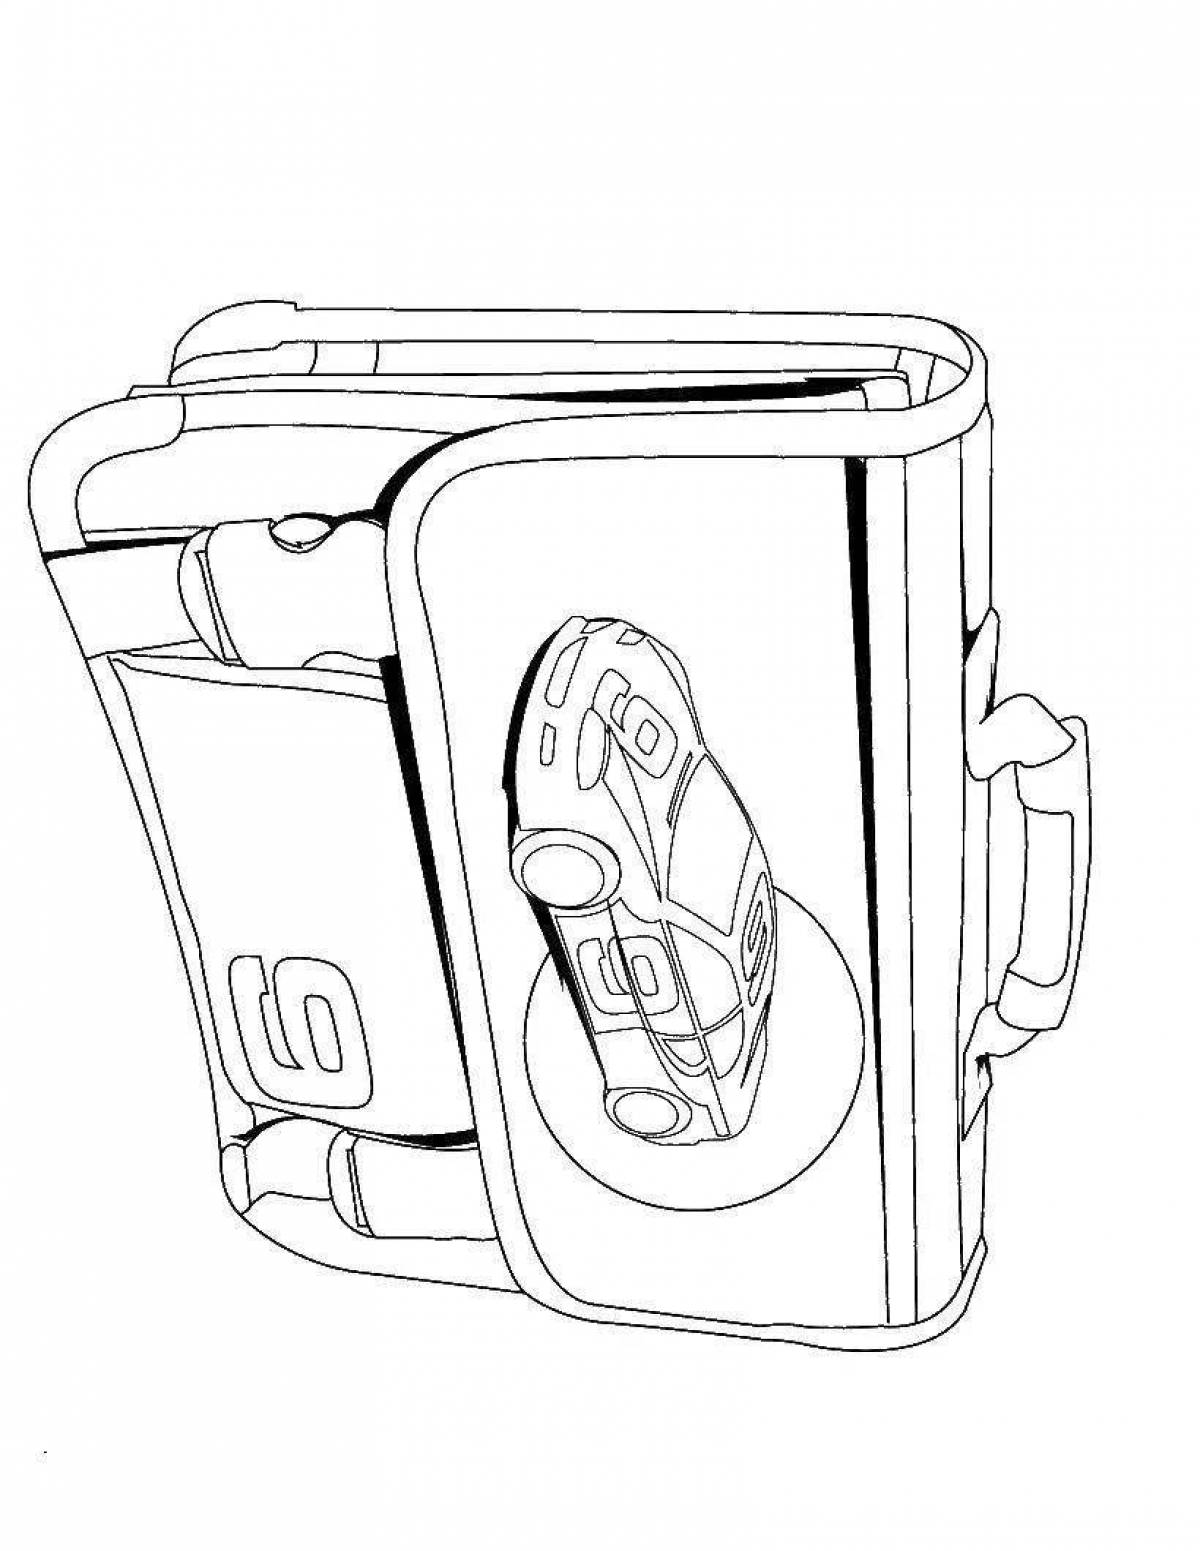 Awesome school bag coloring page